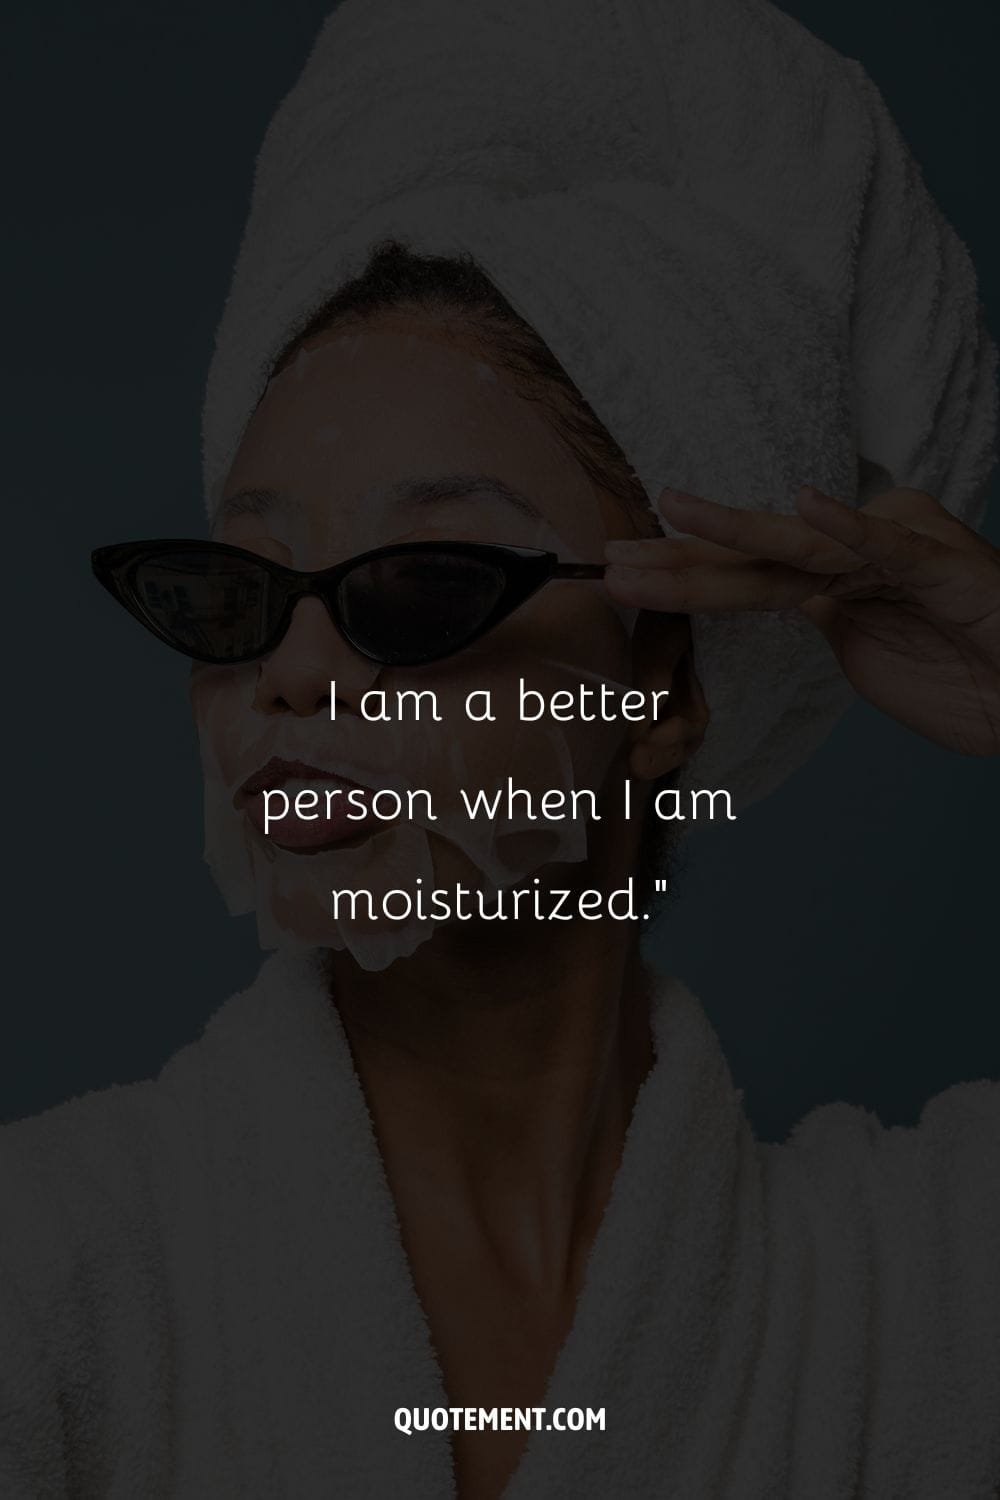 I am a better person when I am moisturized.